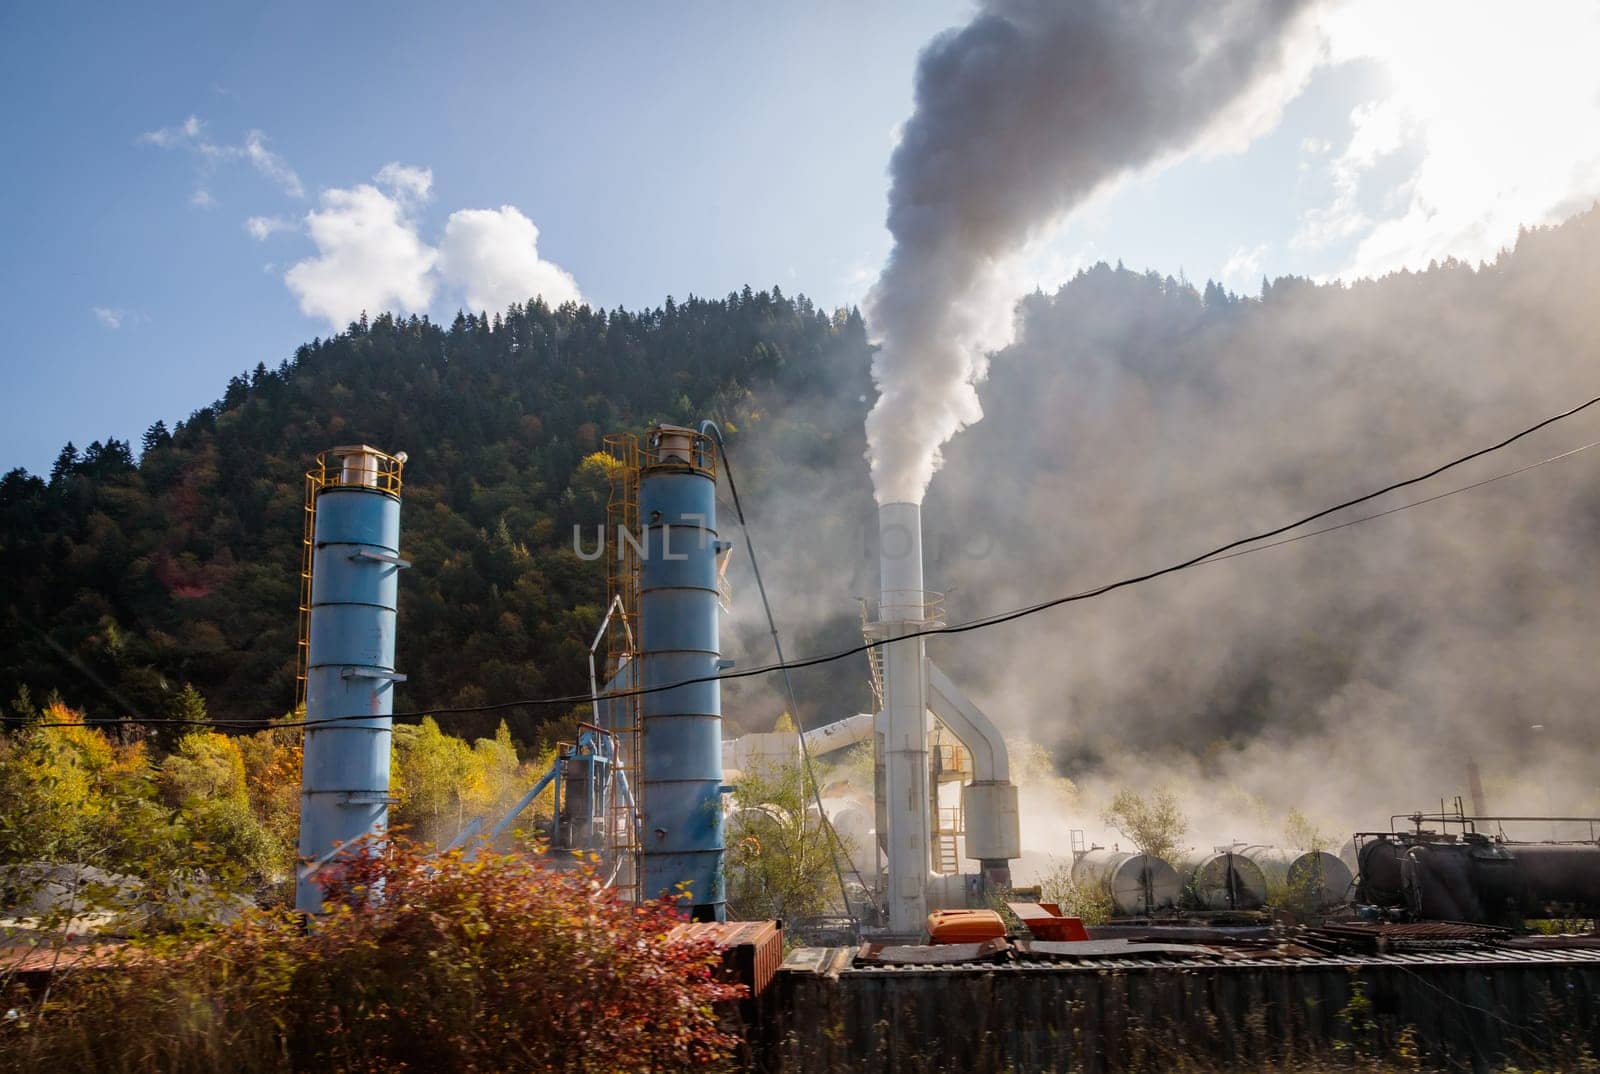 Cement Plant With Smoking Chimneys In The Mountains by Yurich32